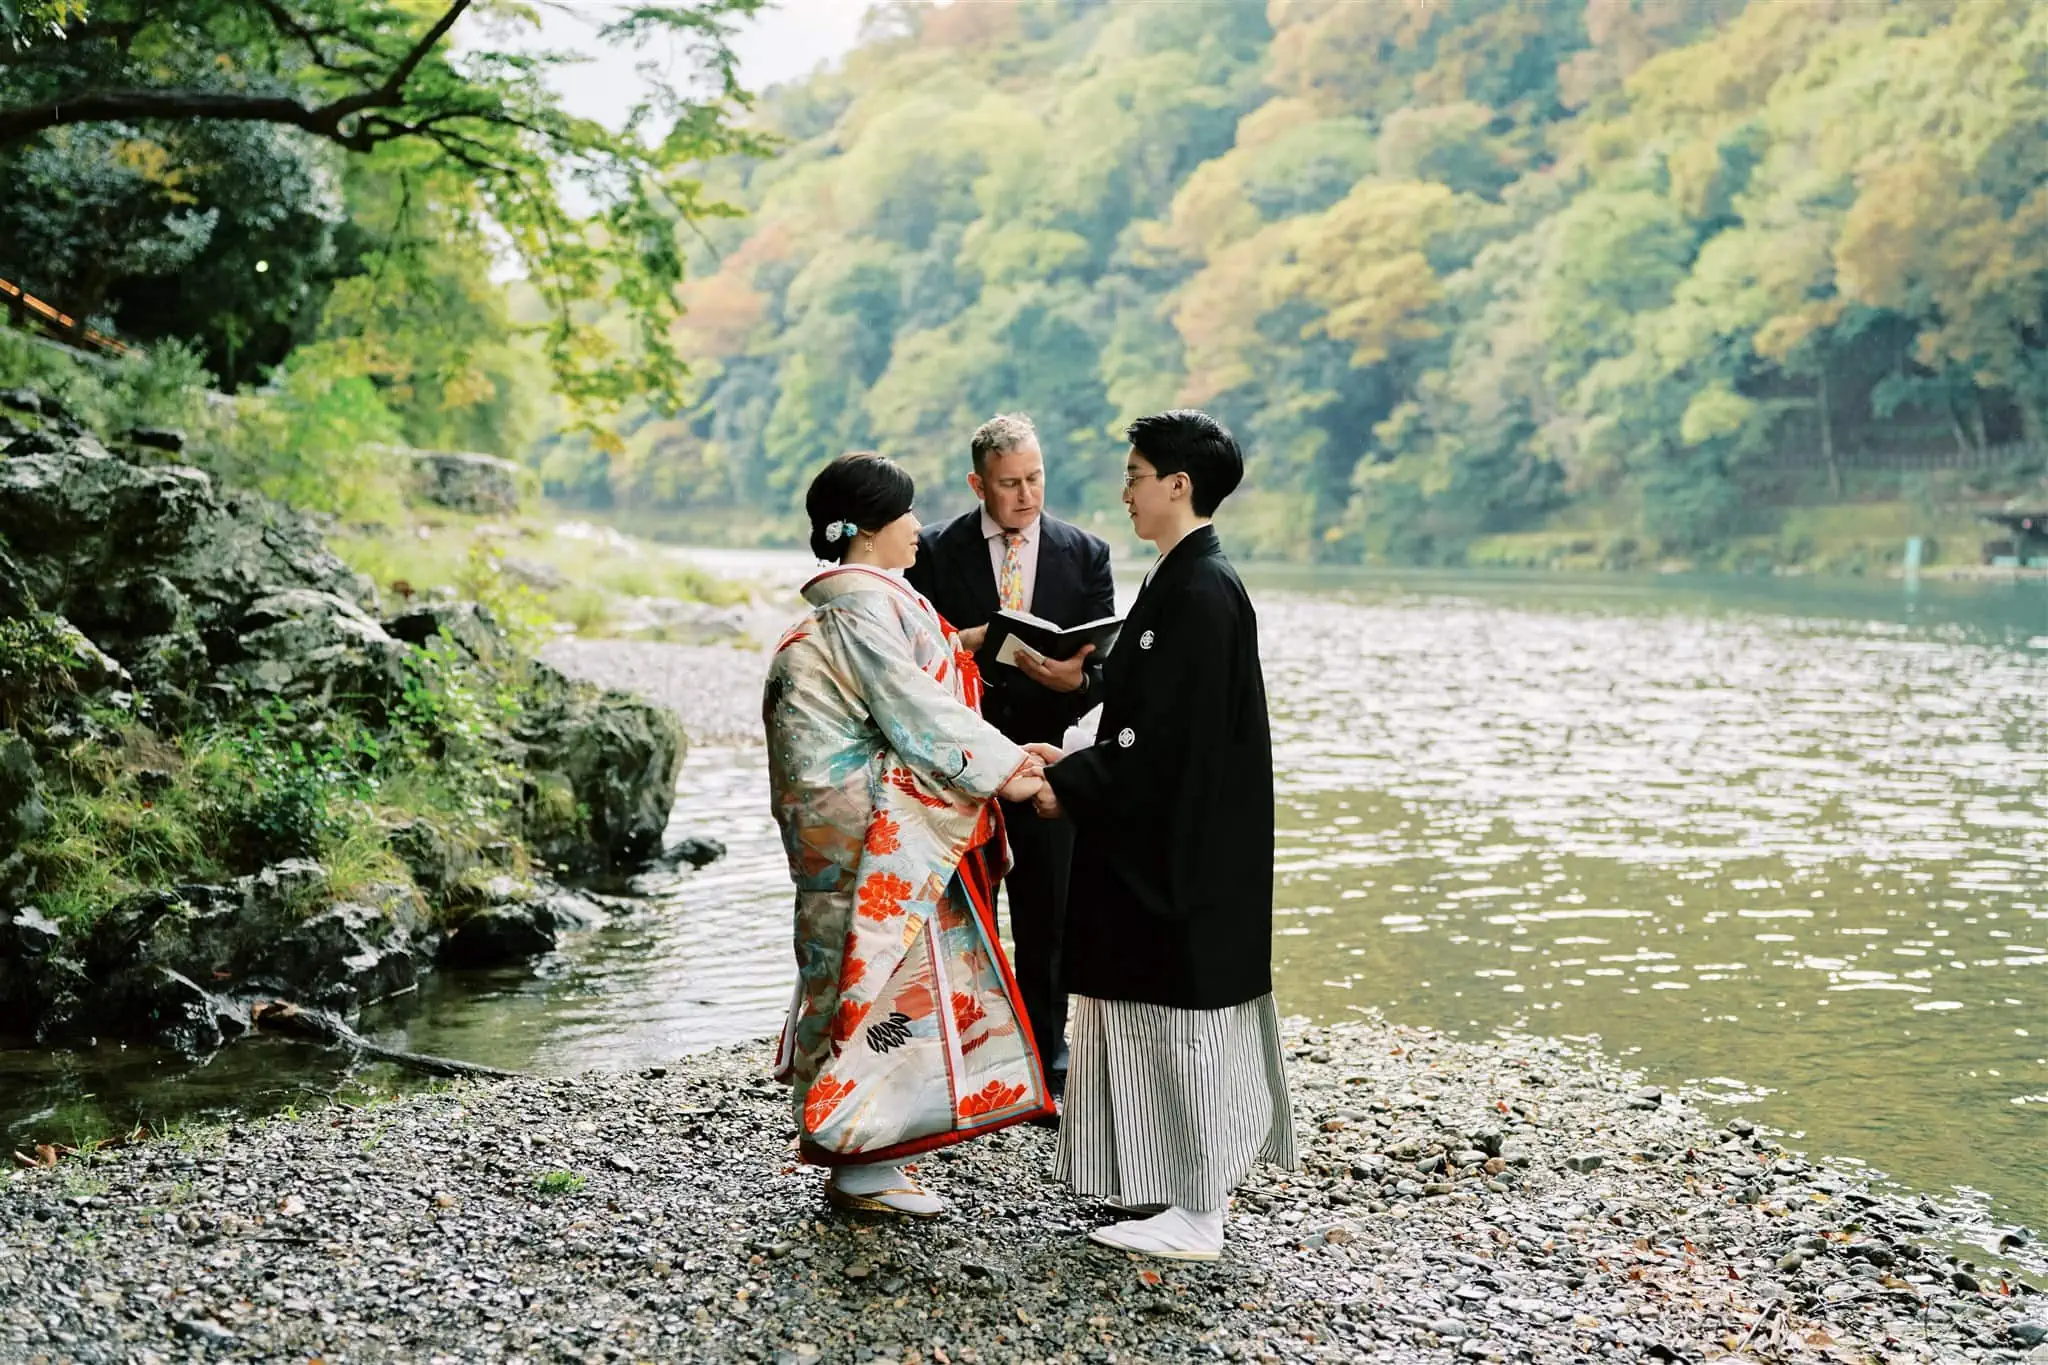 Kyoto Tokyo Japan Elopement Wedding Photographer, Planner & Videographer | Elopement Photographer capturing two people in kimono standing next to a river.